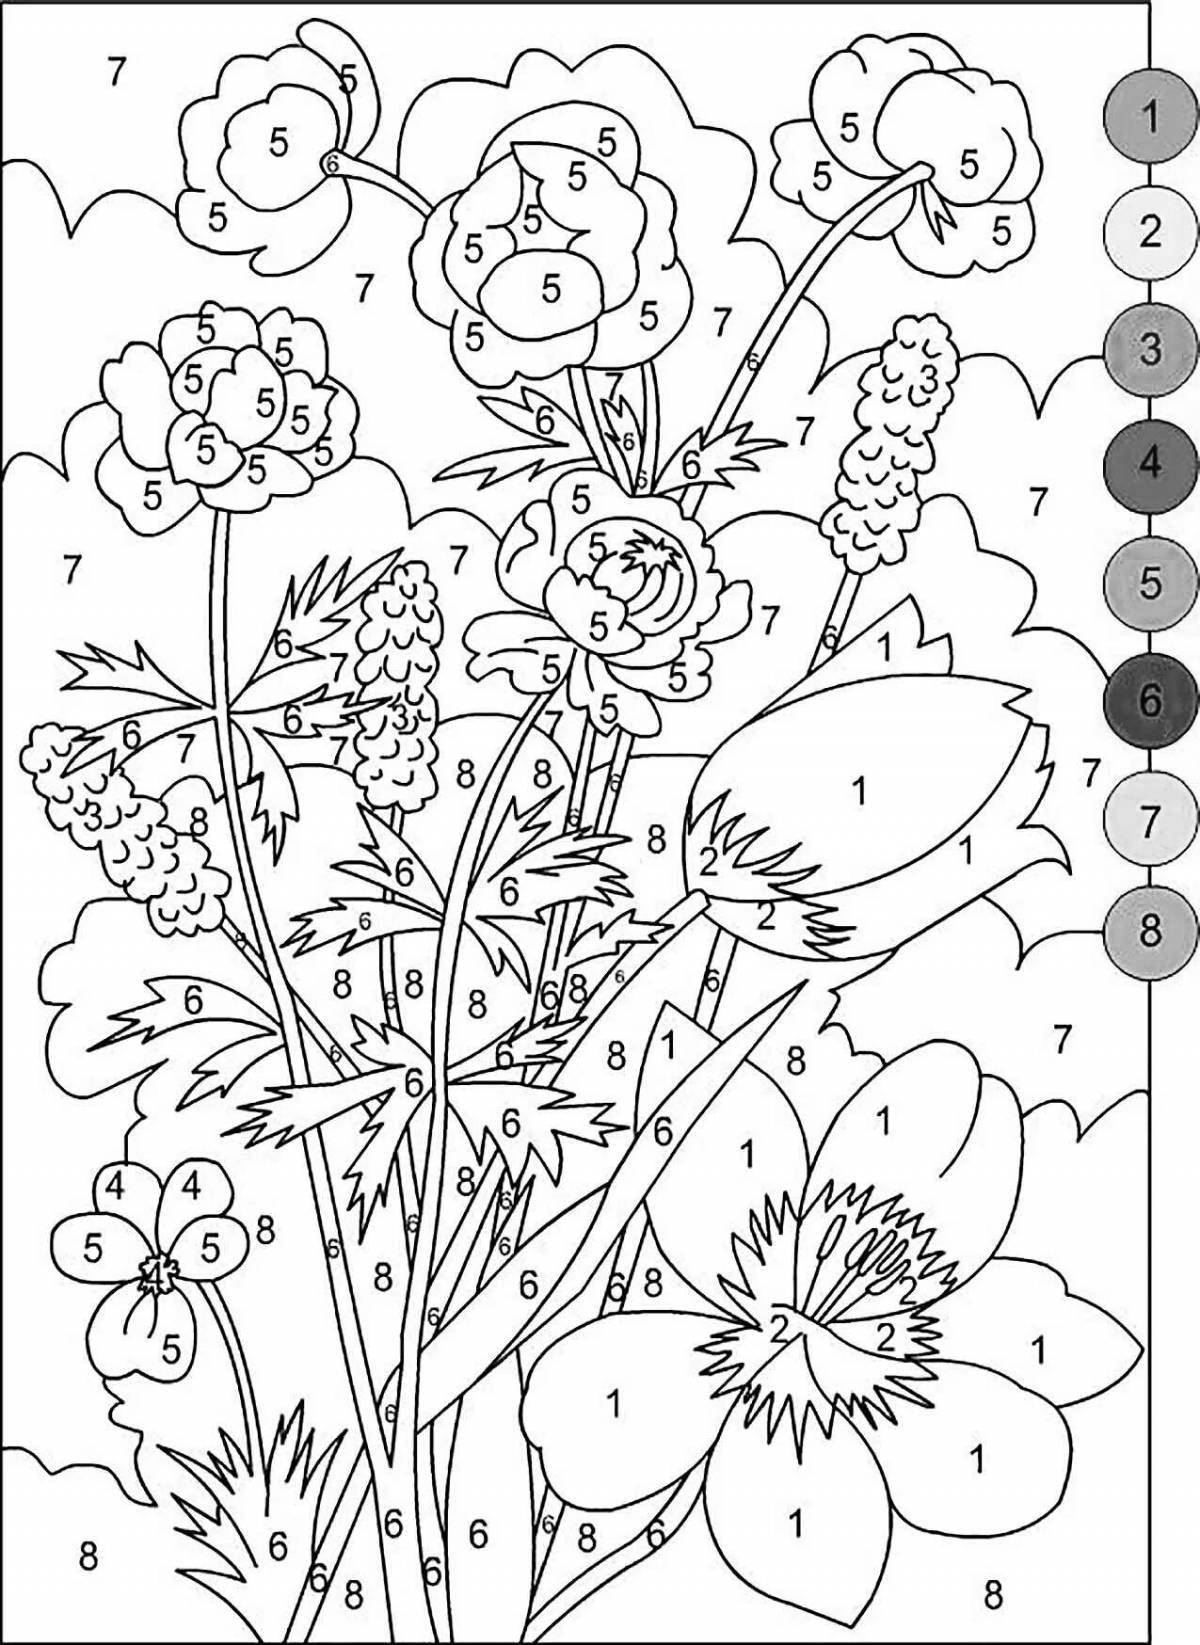 Exciting number coloring page